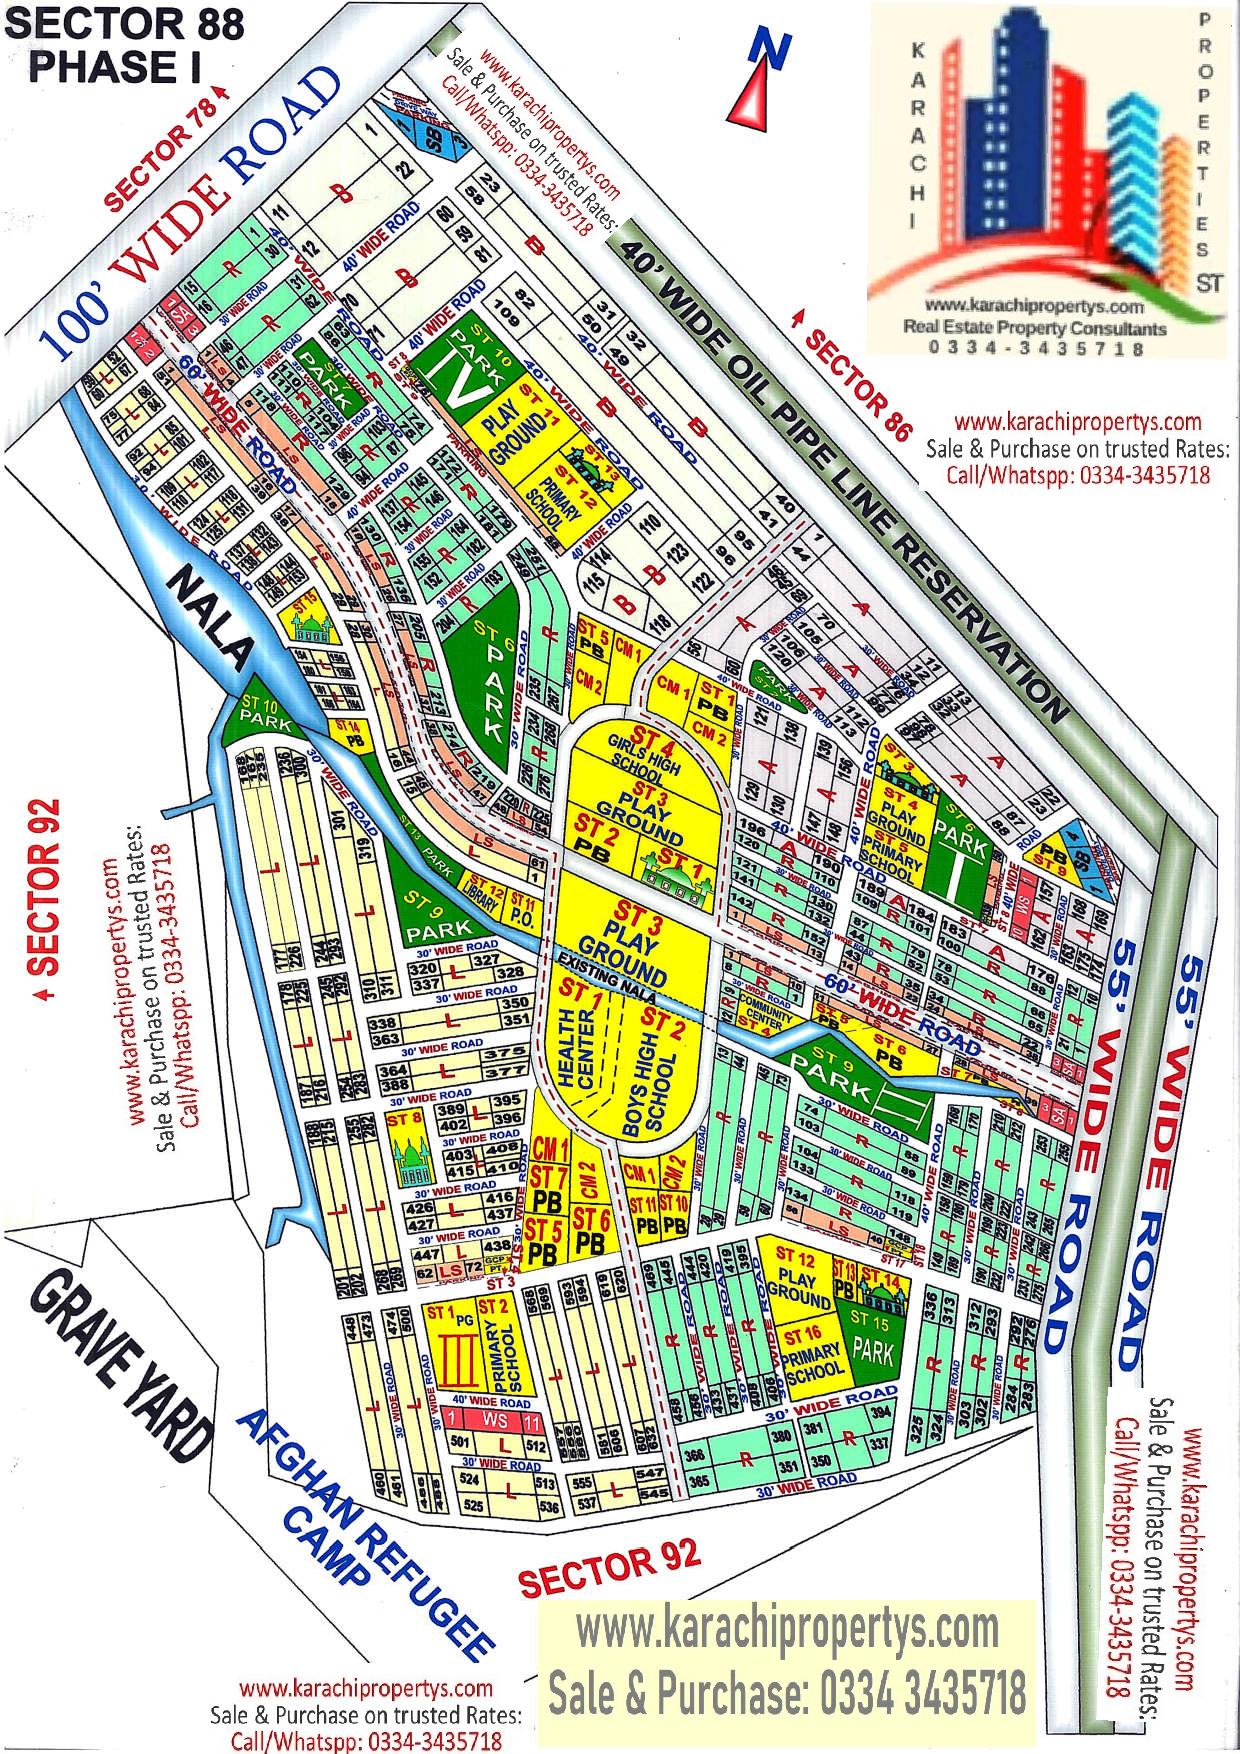 Taiser-Town-latest-map-Sector-88-Phase-1